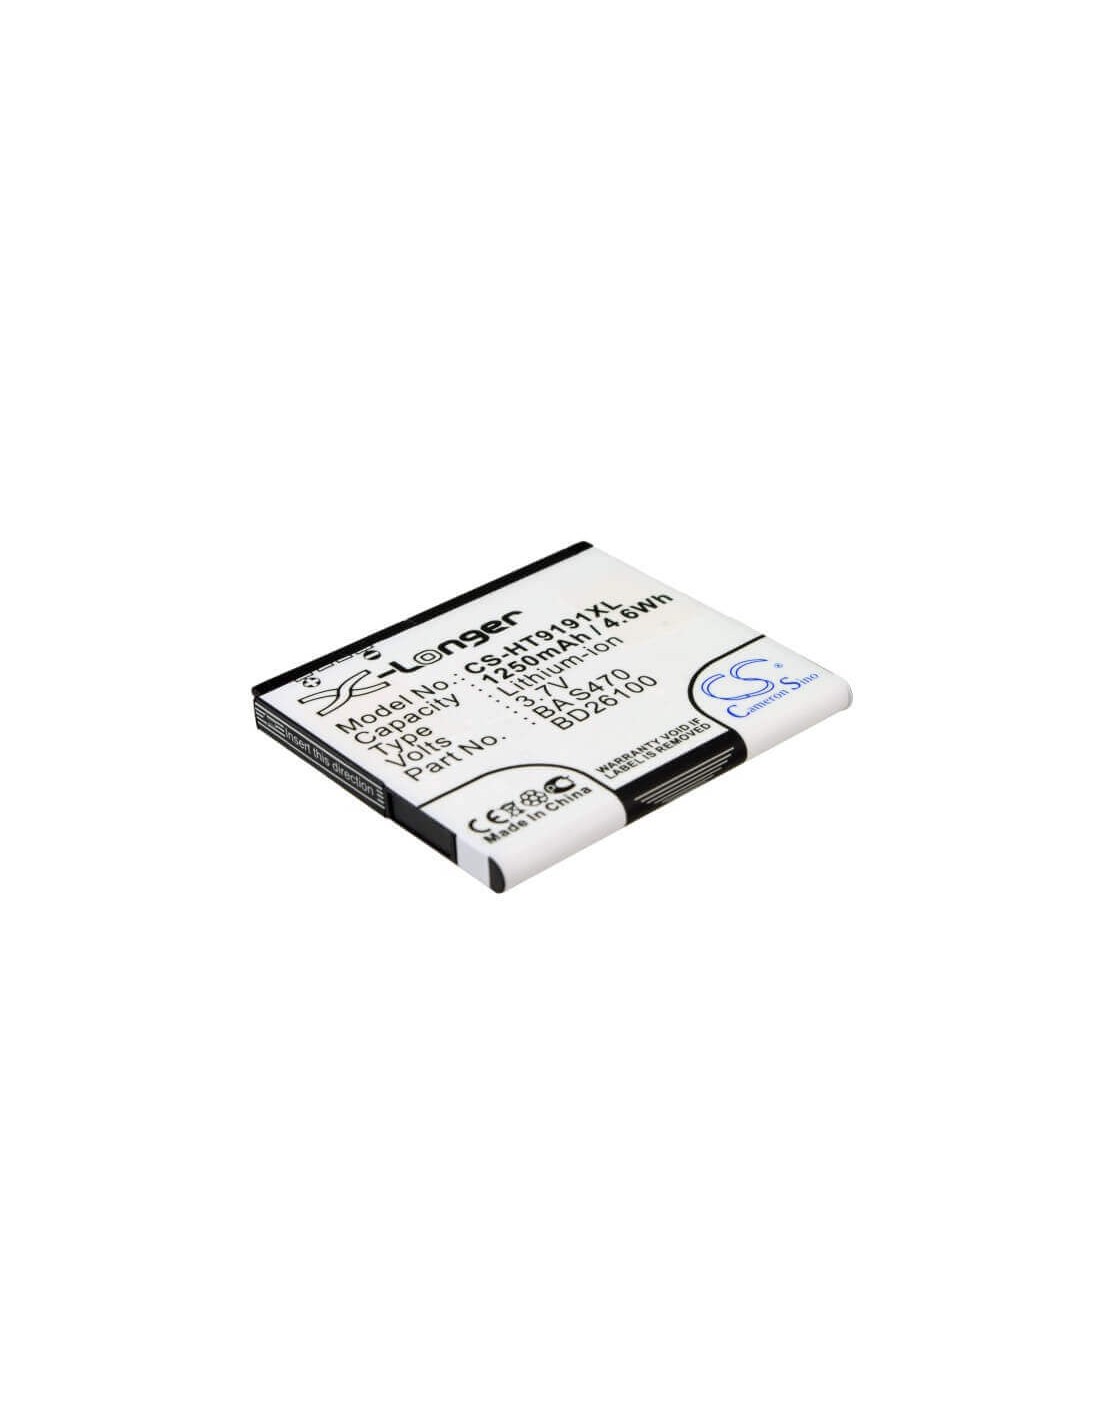 Battery for HTC Ace, Desire HD, A9191 3.7V, 1250mAh - 4.63Wh